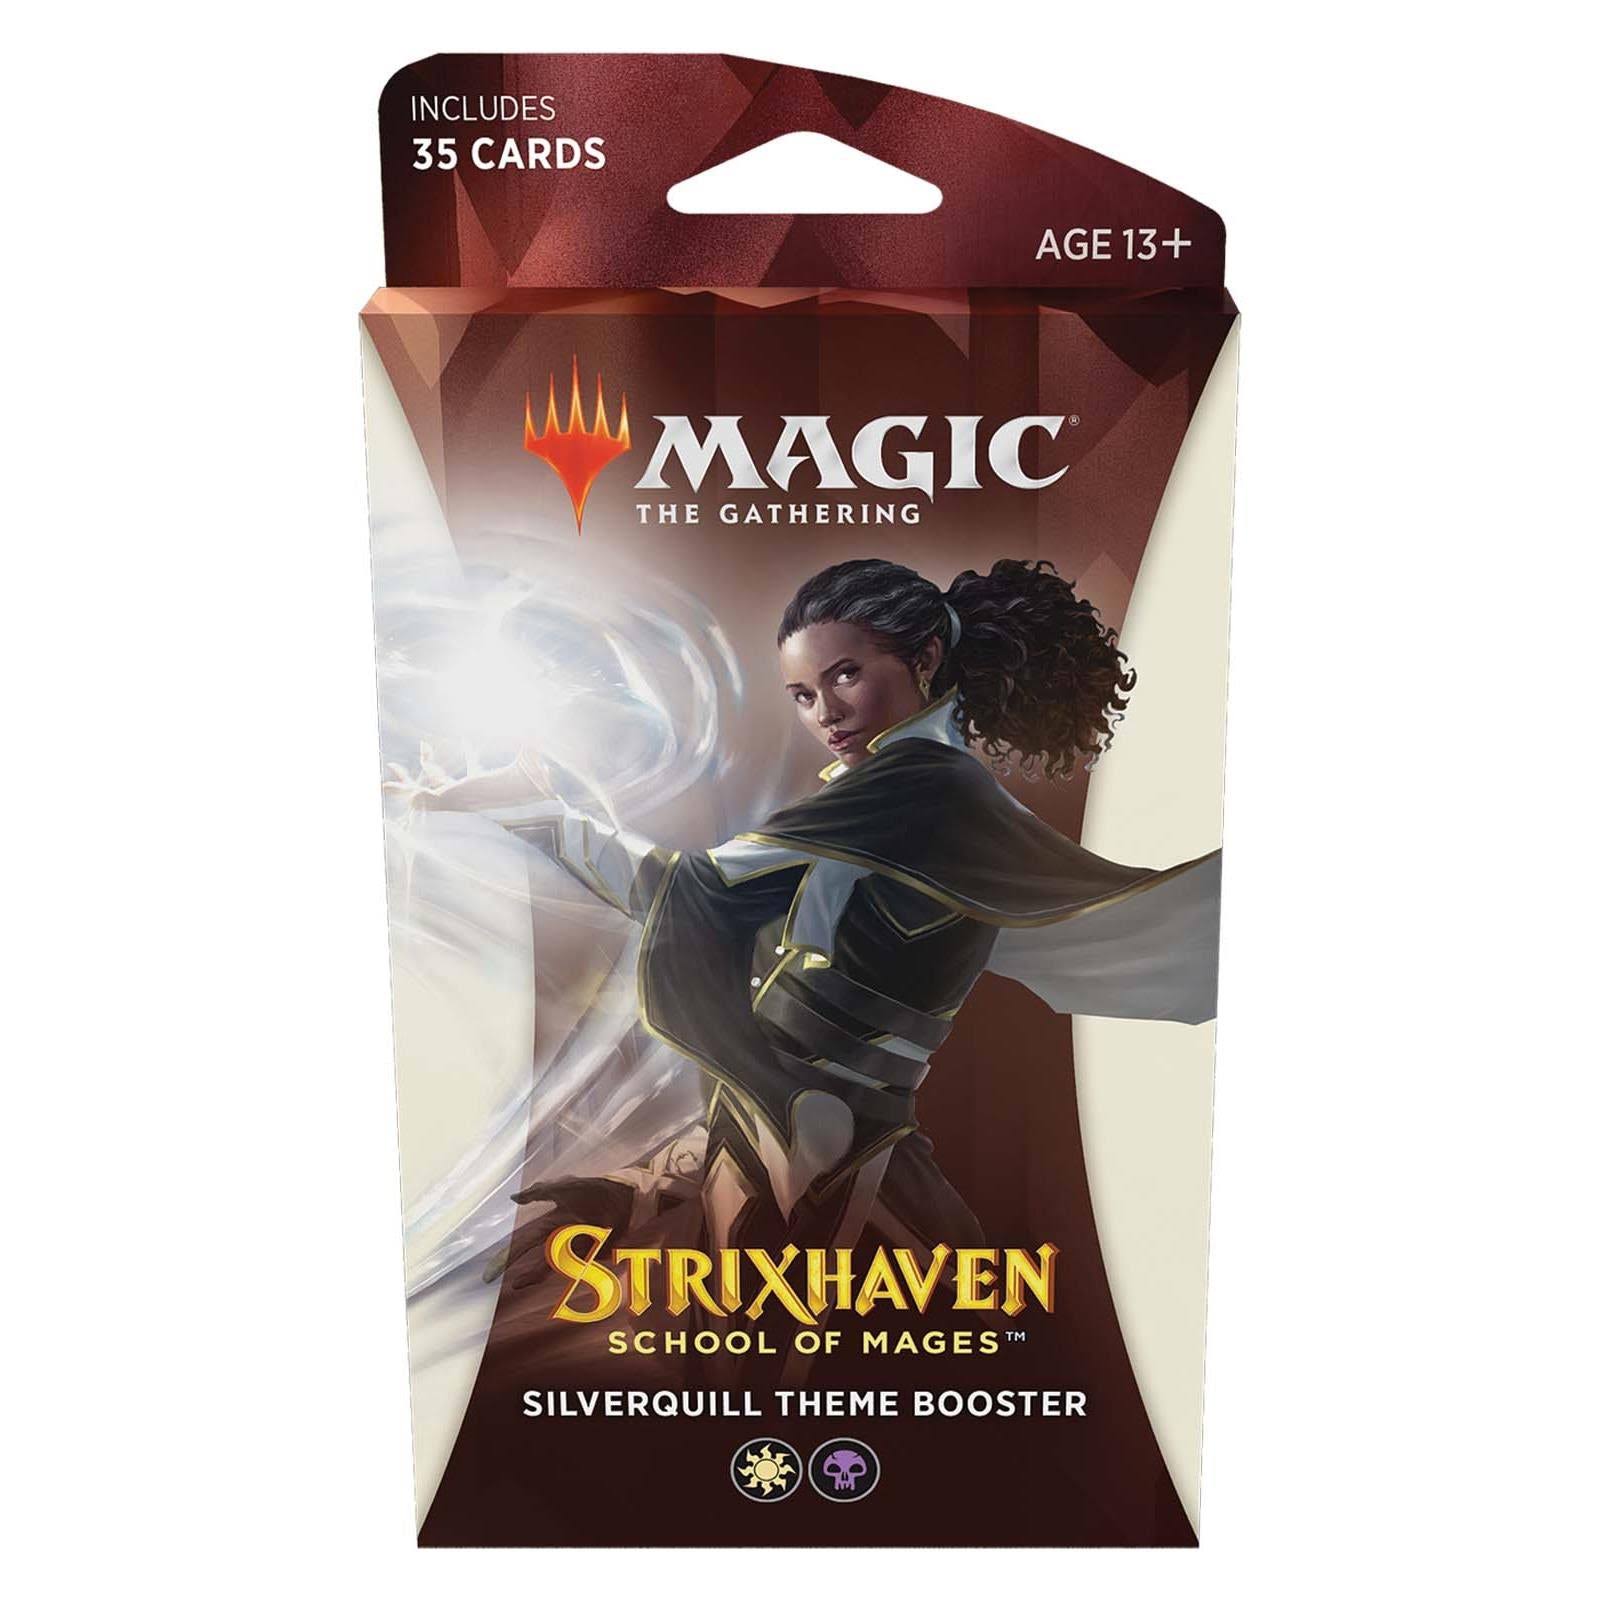 Magic The Gathering Strixhaven School of Mages Theme Booster